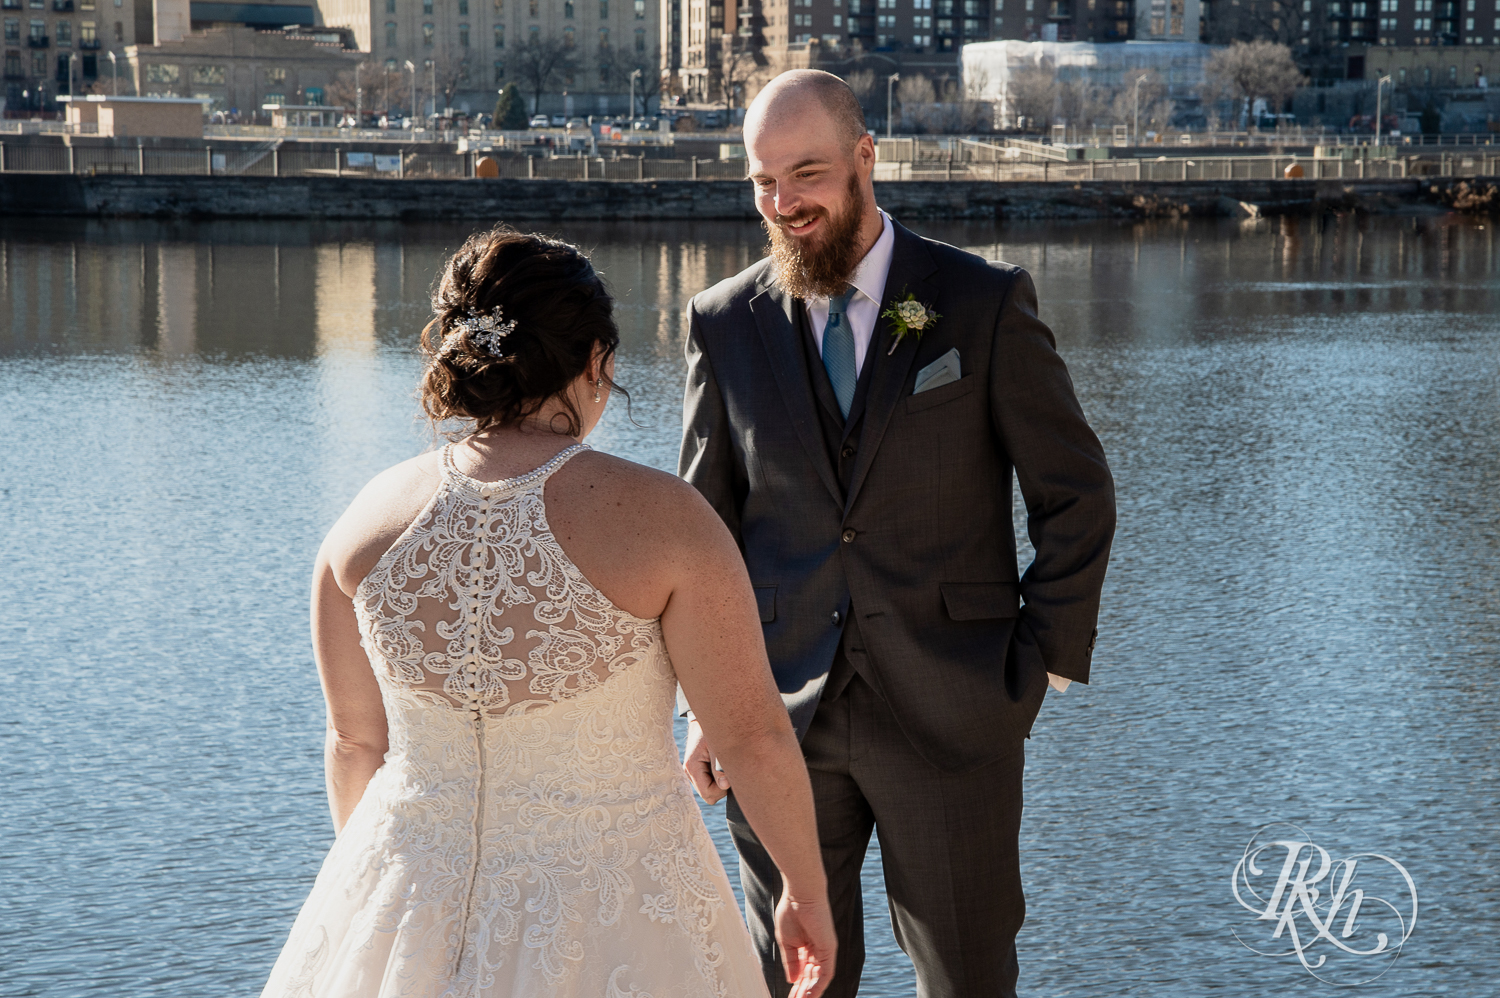 Bride and groom share first look at in front of river in Saint Anthony Main in Minneapolis, Minnesota.